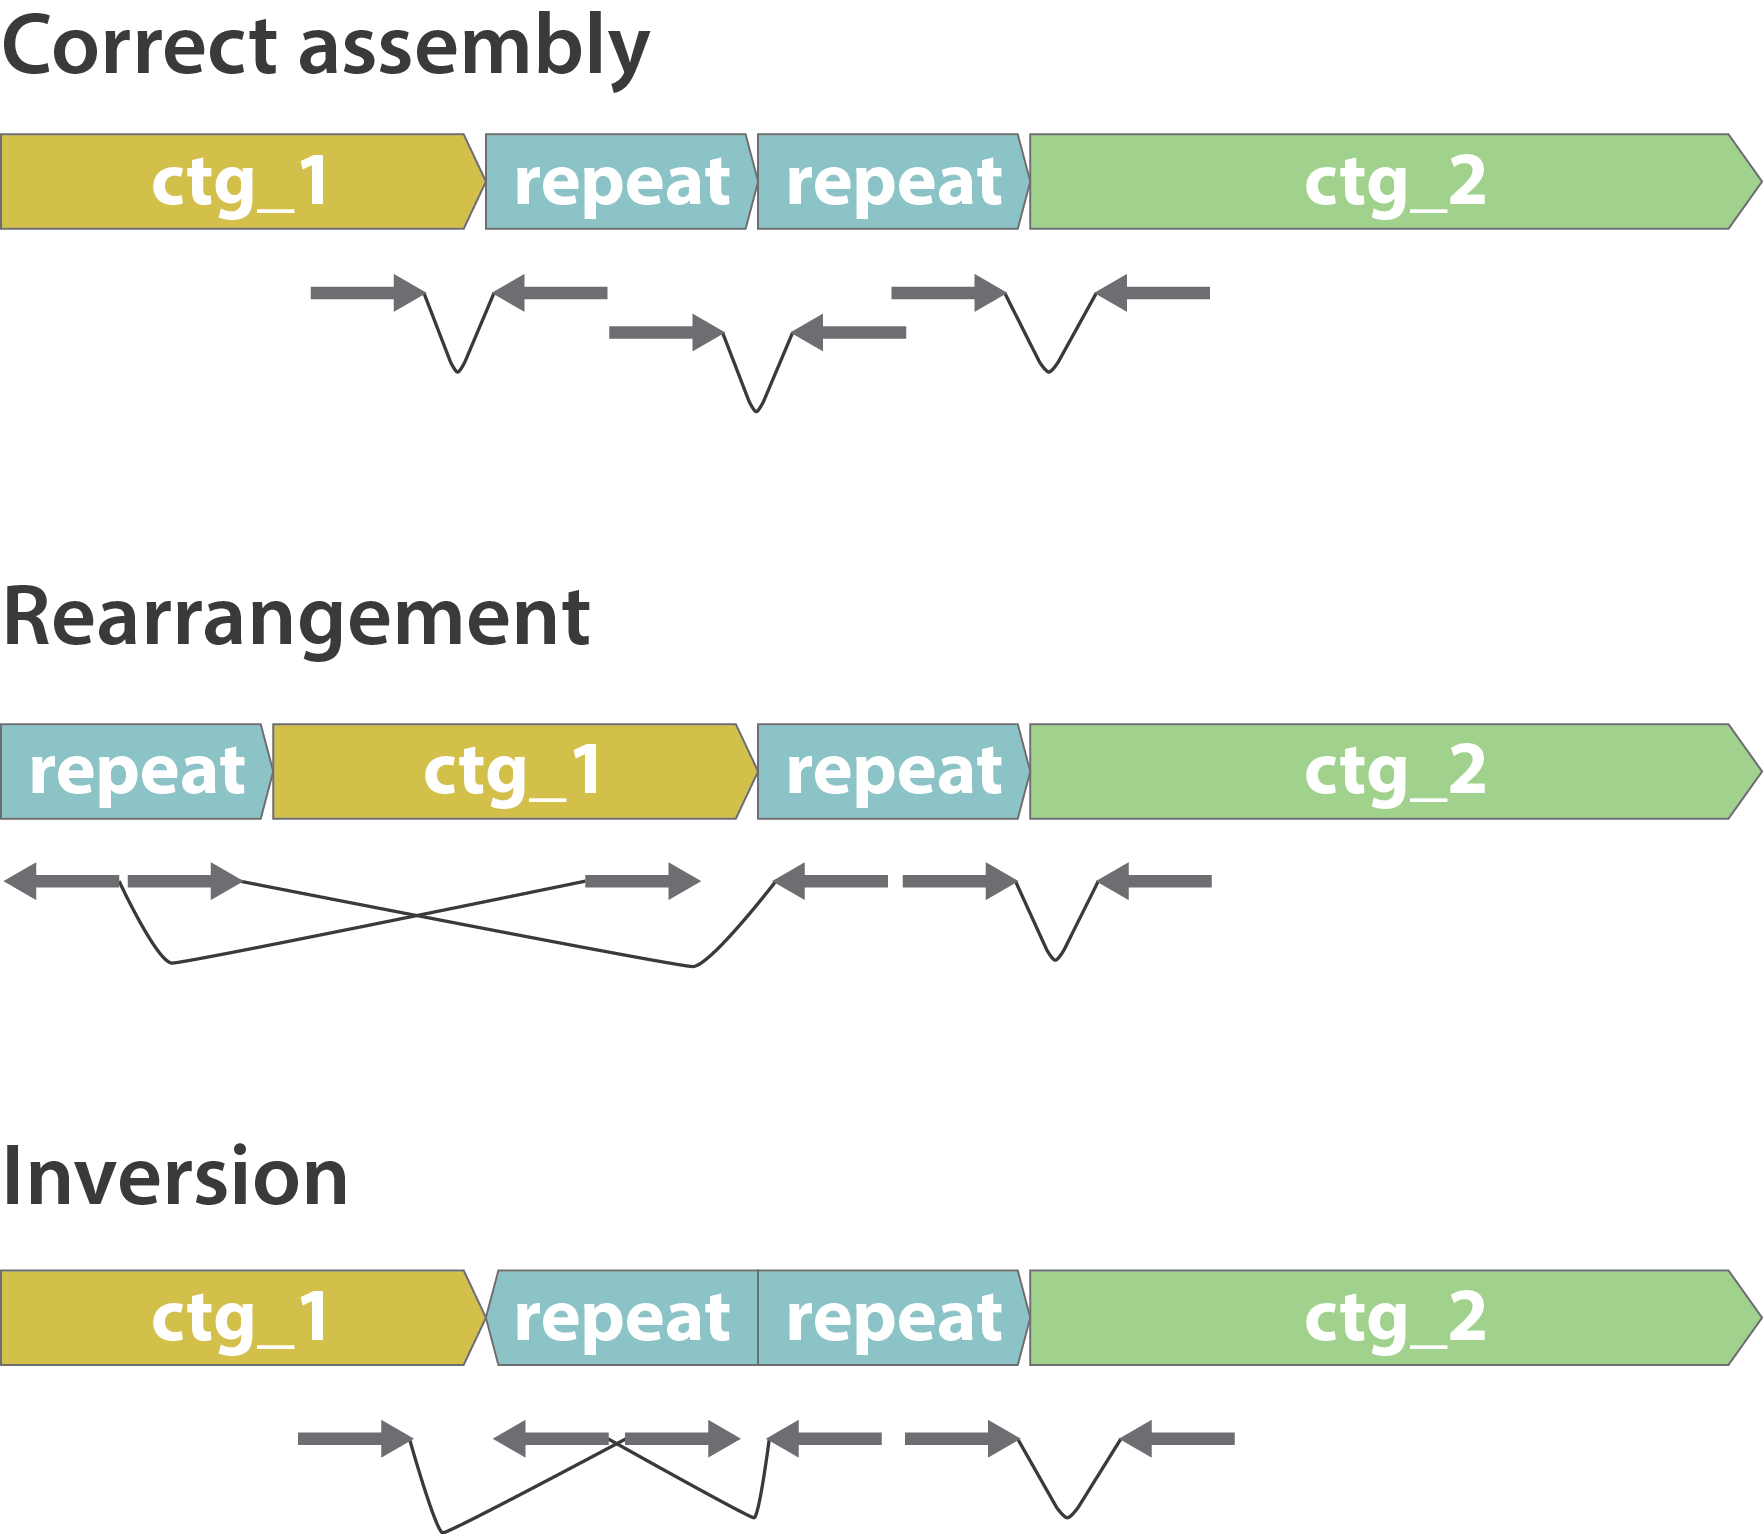 Illustration of rearrangements inversions assembly errors.